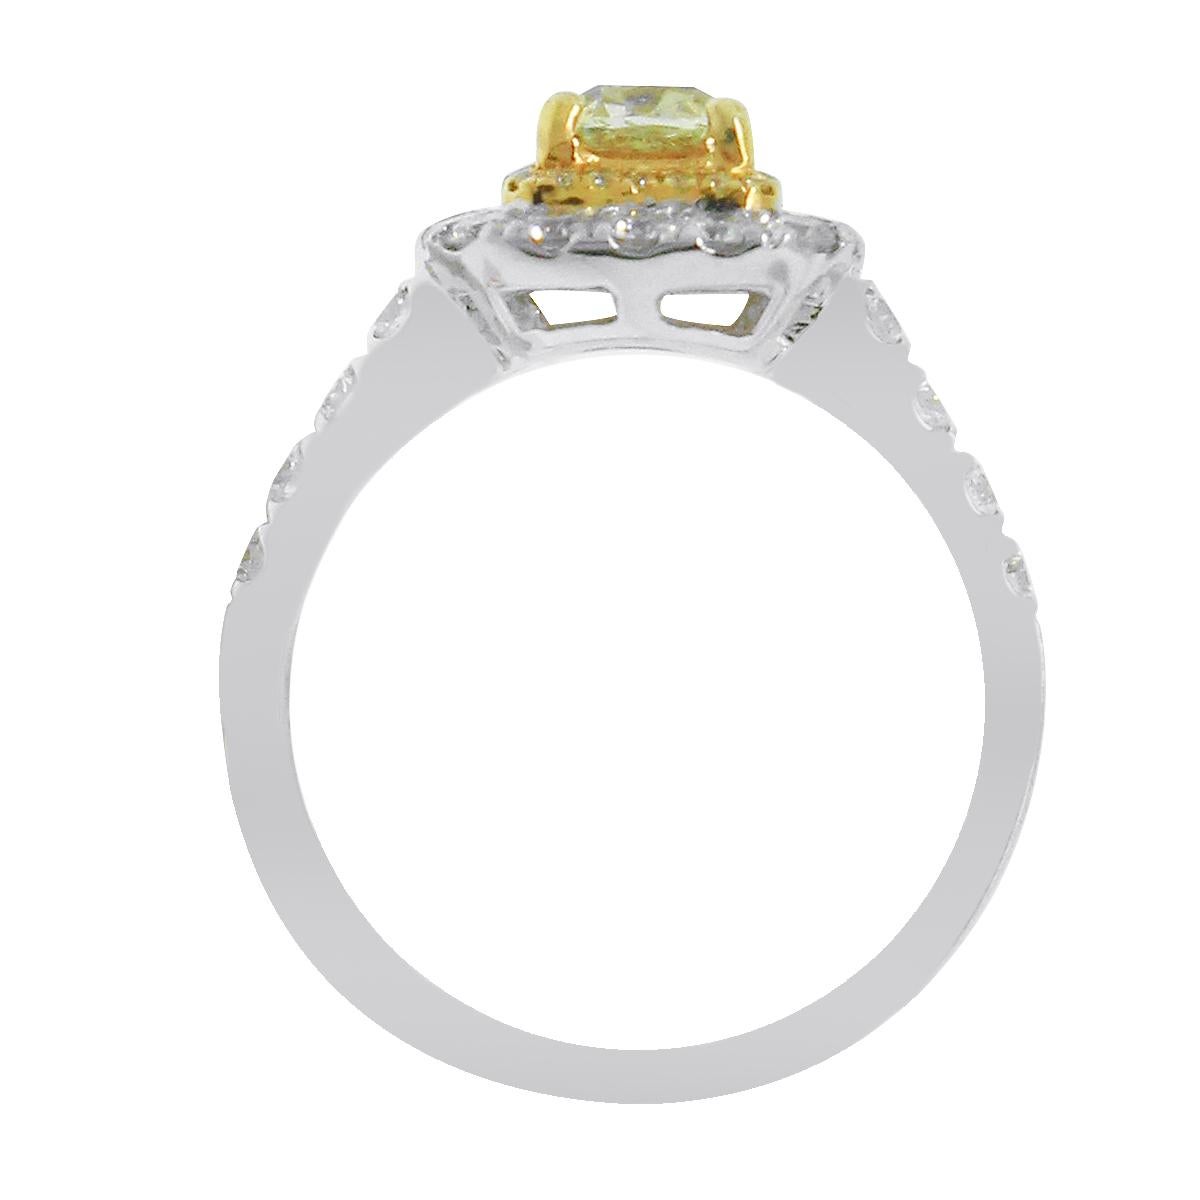 Material: 18k White Gold and 18k Yellow Gold
Center Diamond Details: Approximately 1.08ct cushion cut yellow diamond. Center diamond is SI1 in clarity.
Accent Diamond Details: Approximately 0.11ctw yellow accent diamonds and approximately 0.42ctw